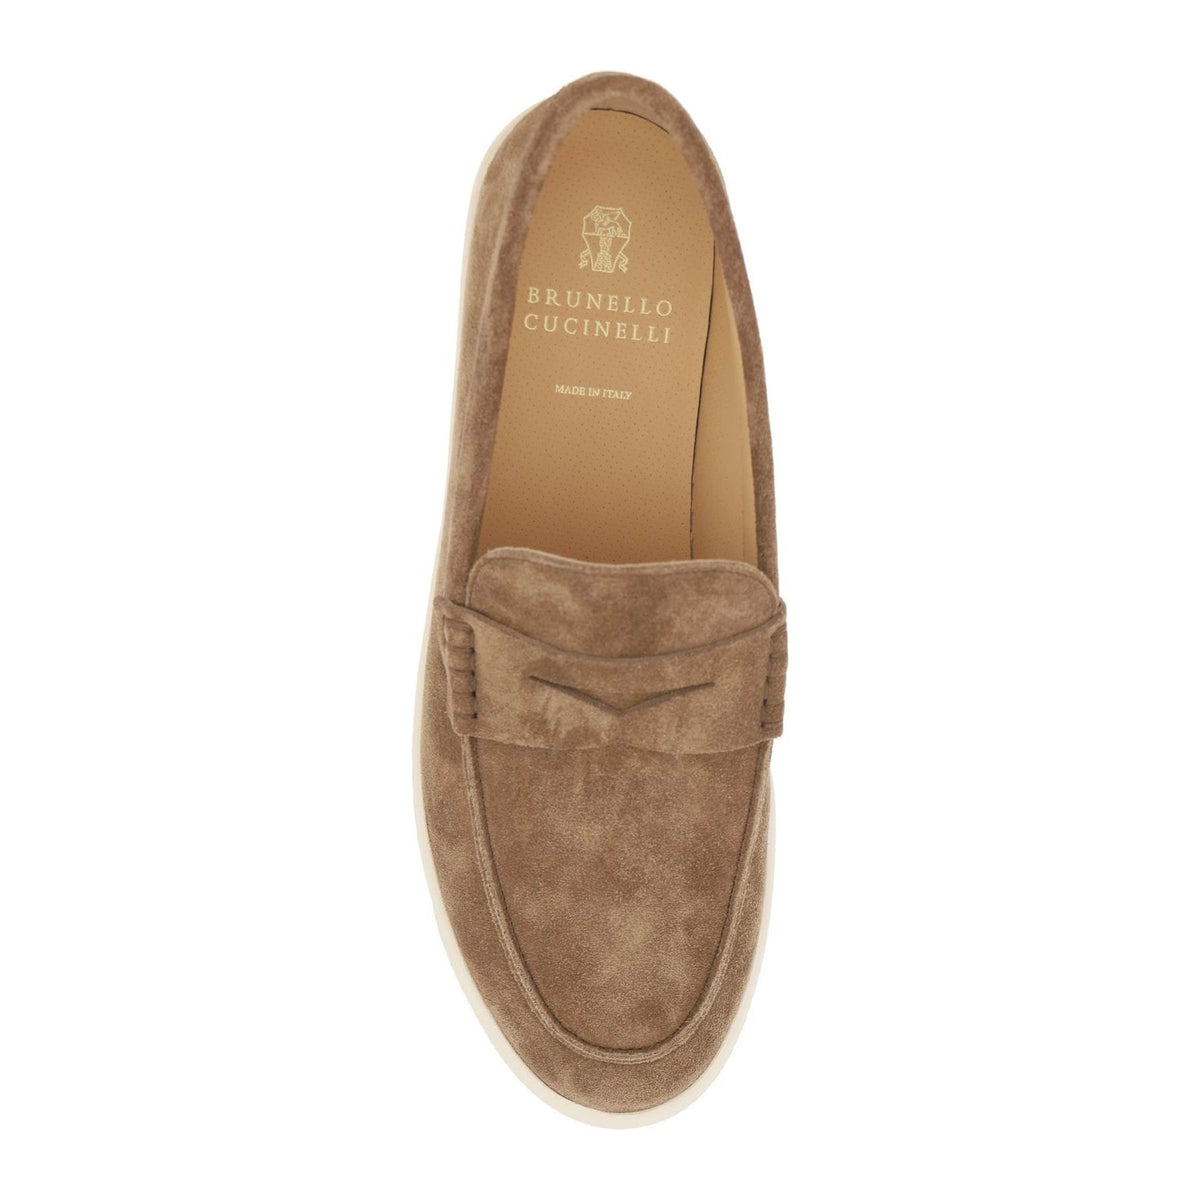 Chestnut Suede Loafers